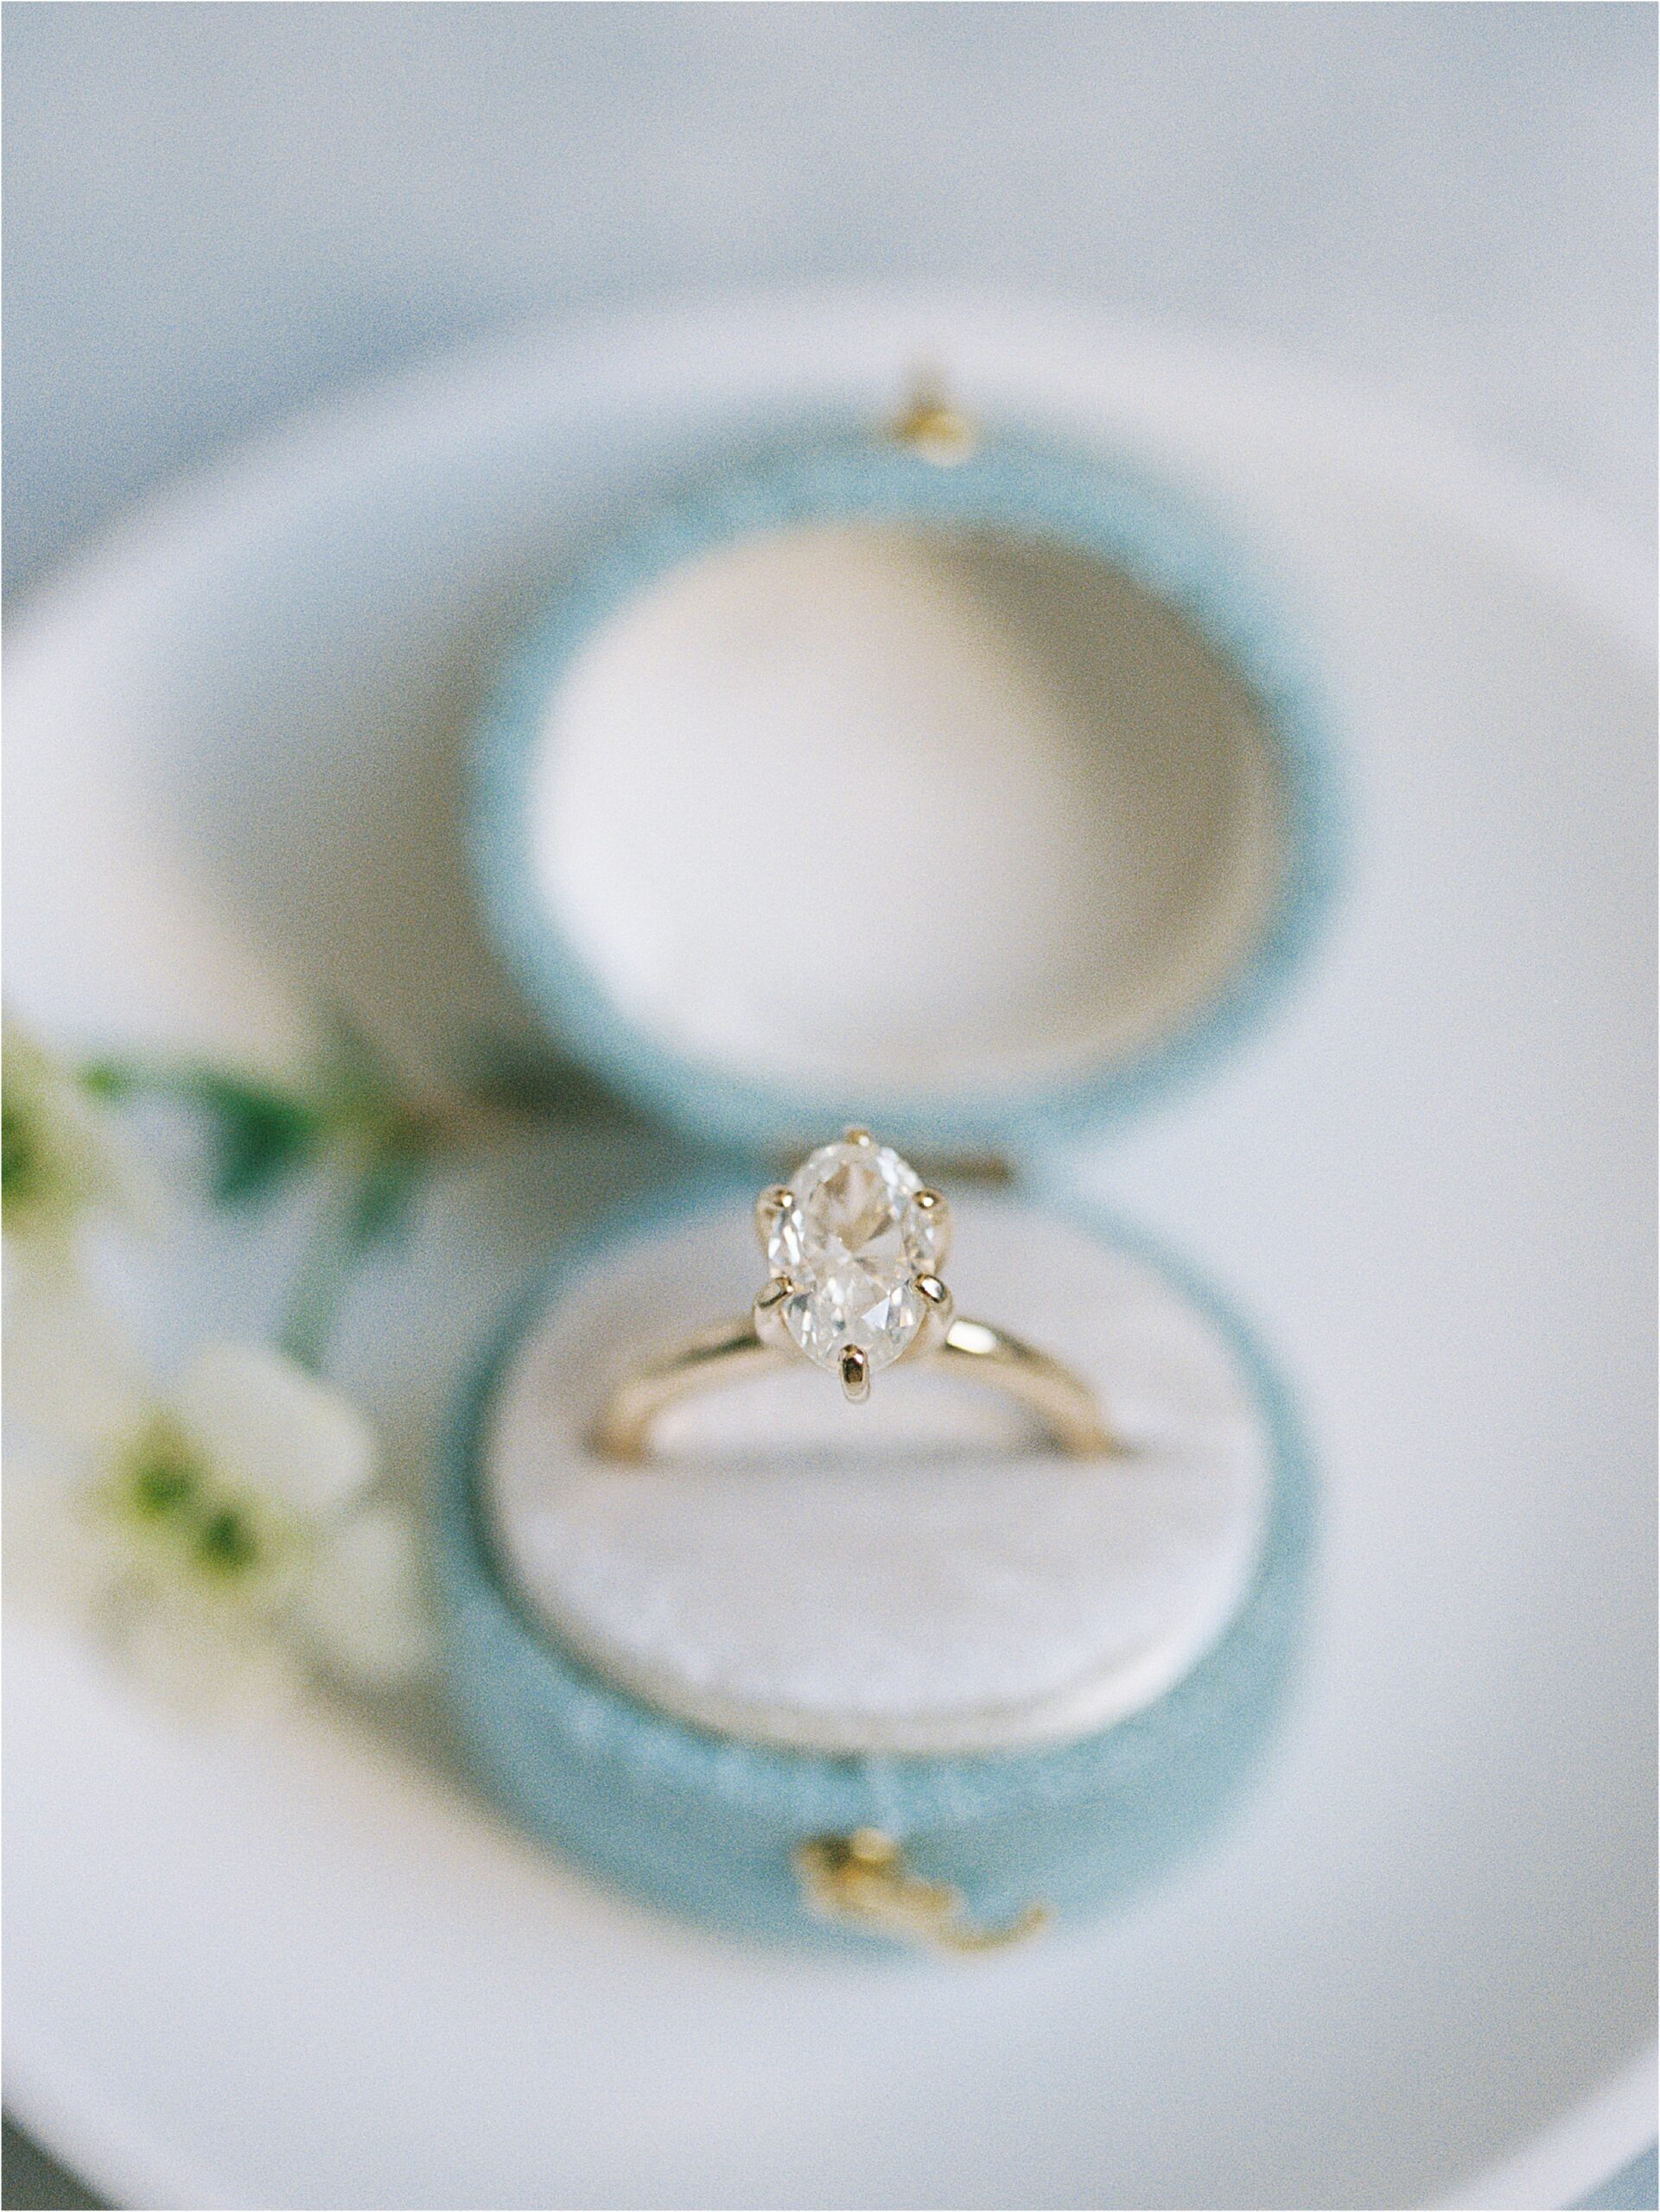 A diamond ring in a blue ring box sitting on a white plate.